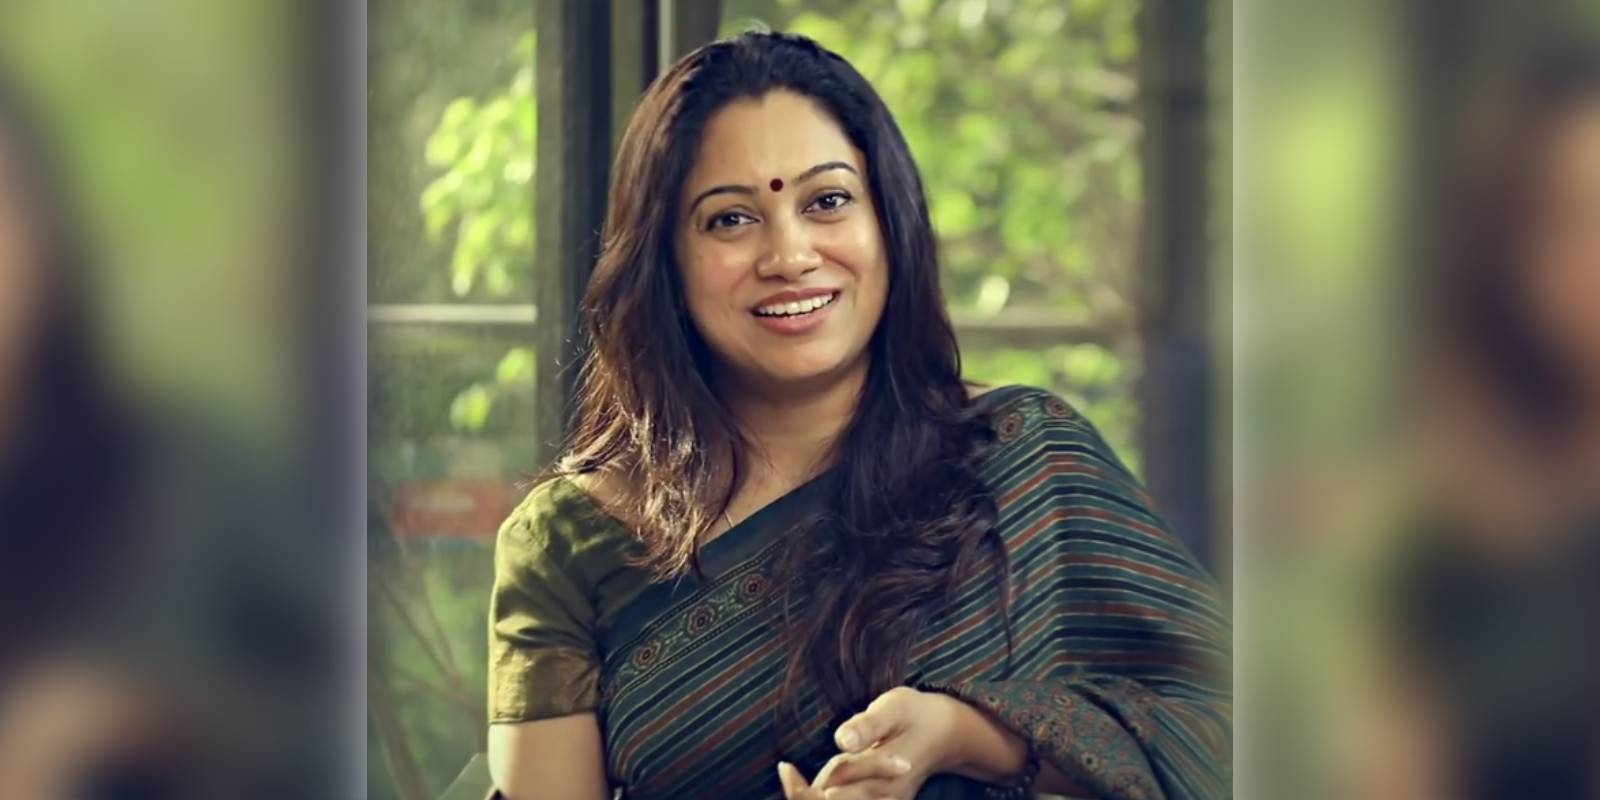 KRG Studios is collaborating with Anjali Menon for a Tamil film